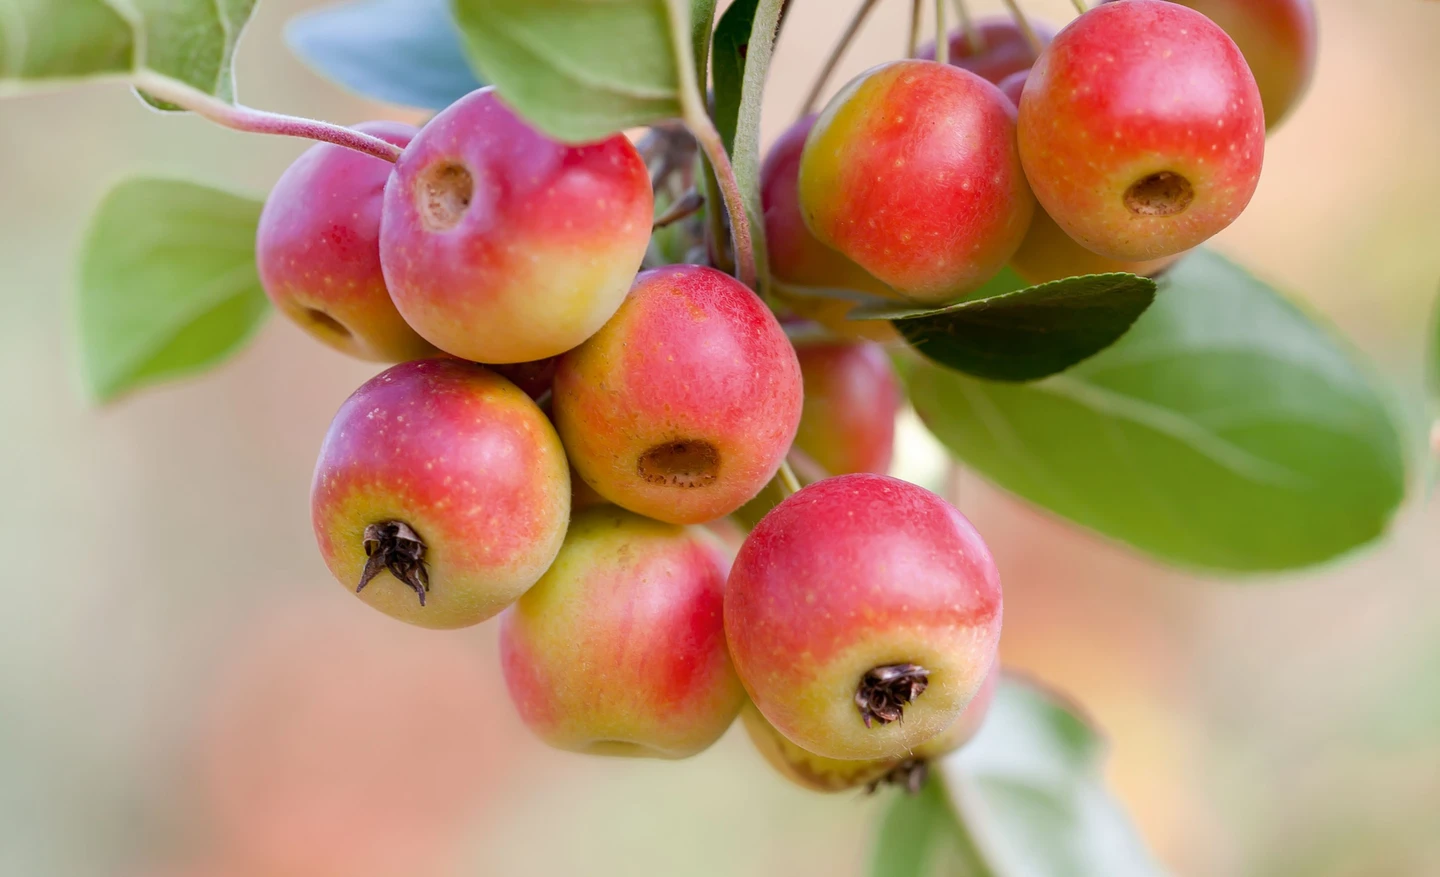 A cluster of ripe, red and yellow apples hanging from a tree branch, surrounded by green leaves, with a soft-focus background.